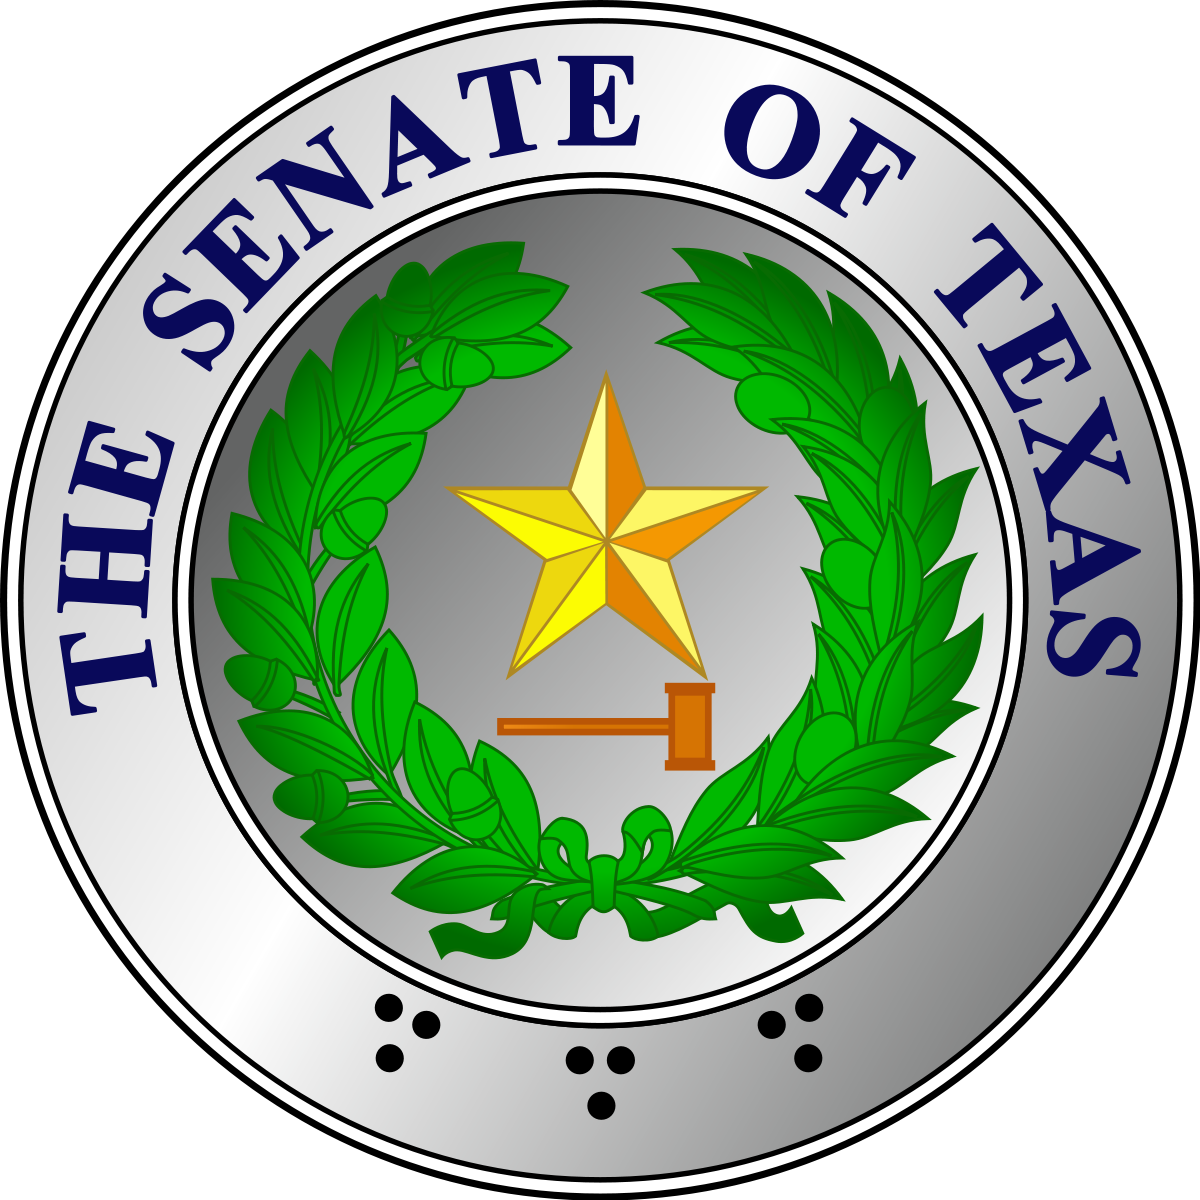 texas senate committee assignments